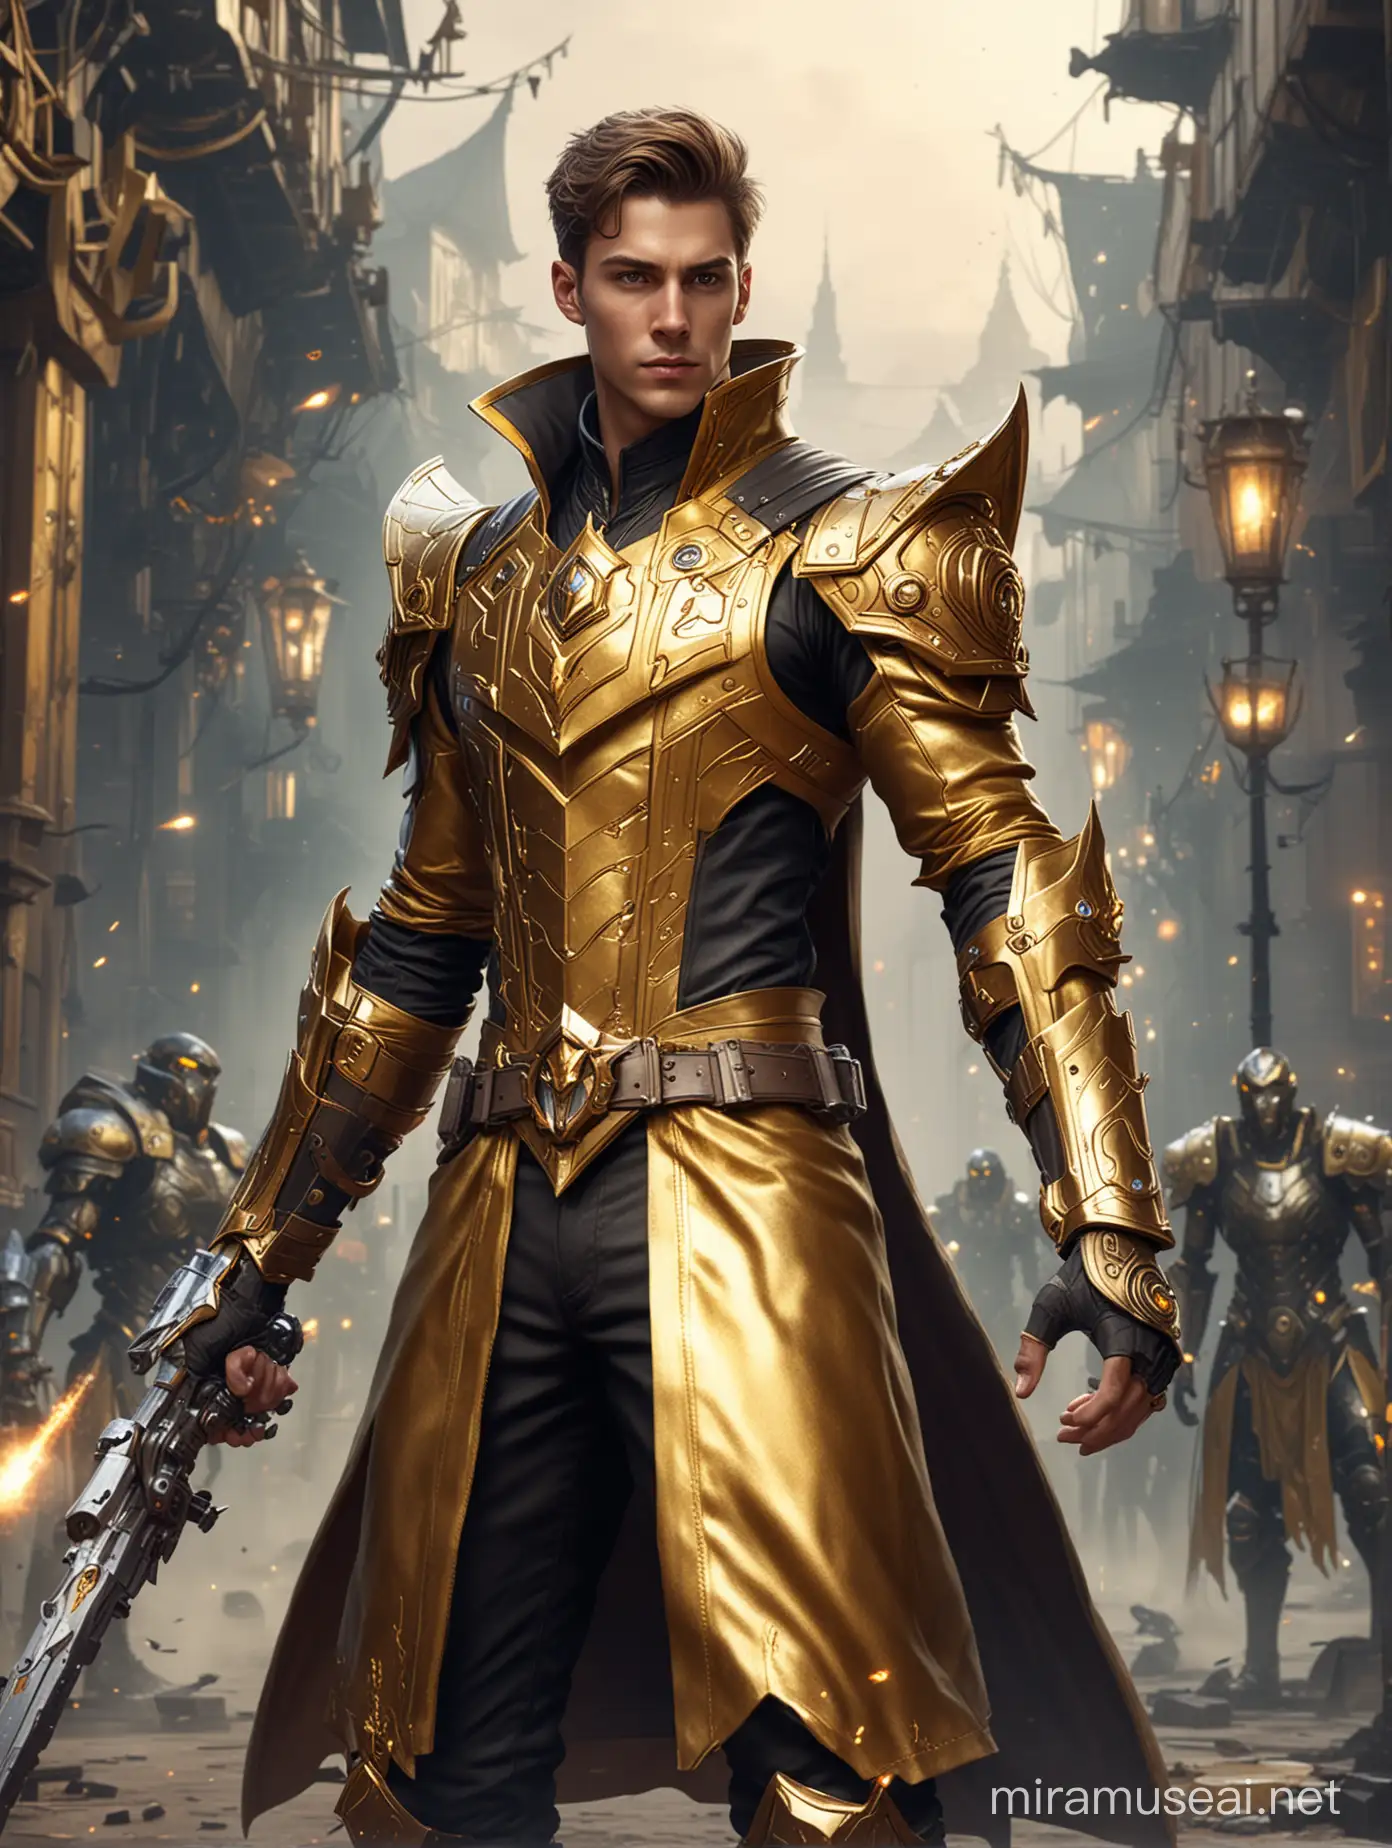 A handsome young man in a charming and hot gold warlock outfit, fighting dangerous bots in a system world